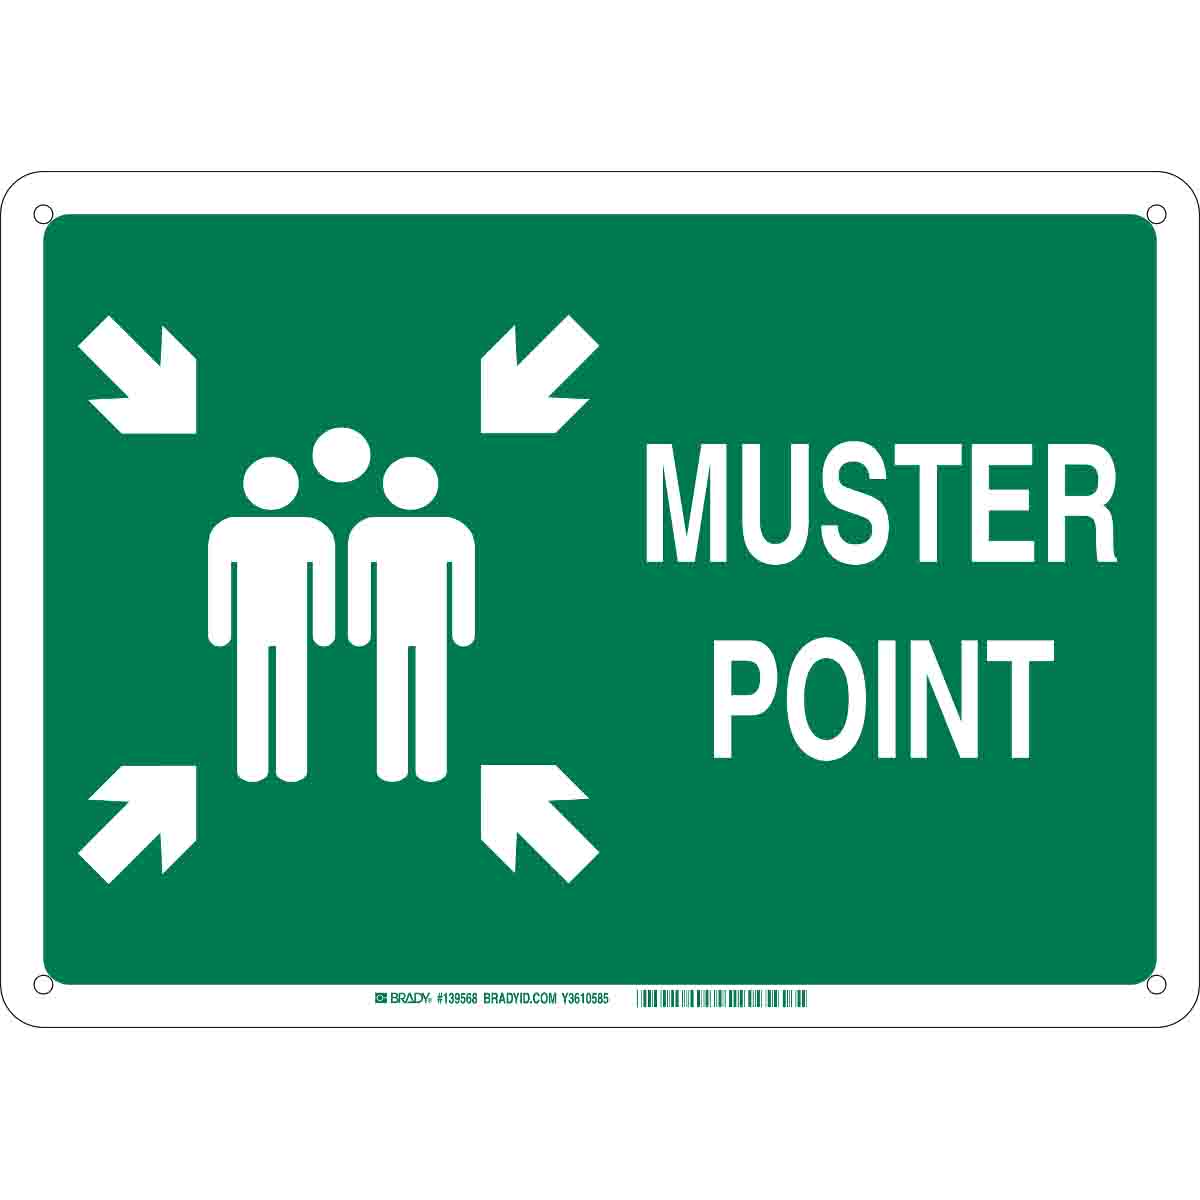 Brady® 139571 Rectangular Muster Point Sign, 10 in H x 14 in W, Green on White, B-401 Polystyrene, Corner Hole Mount